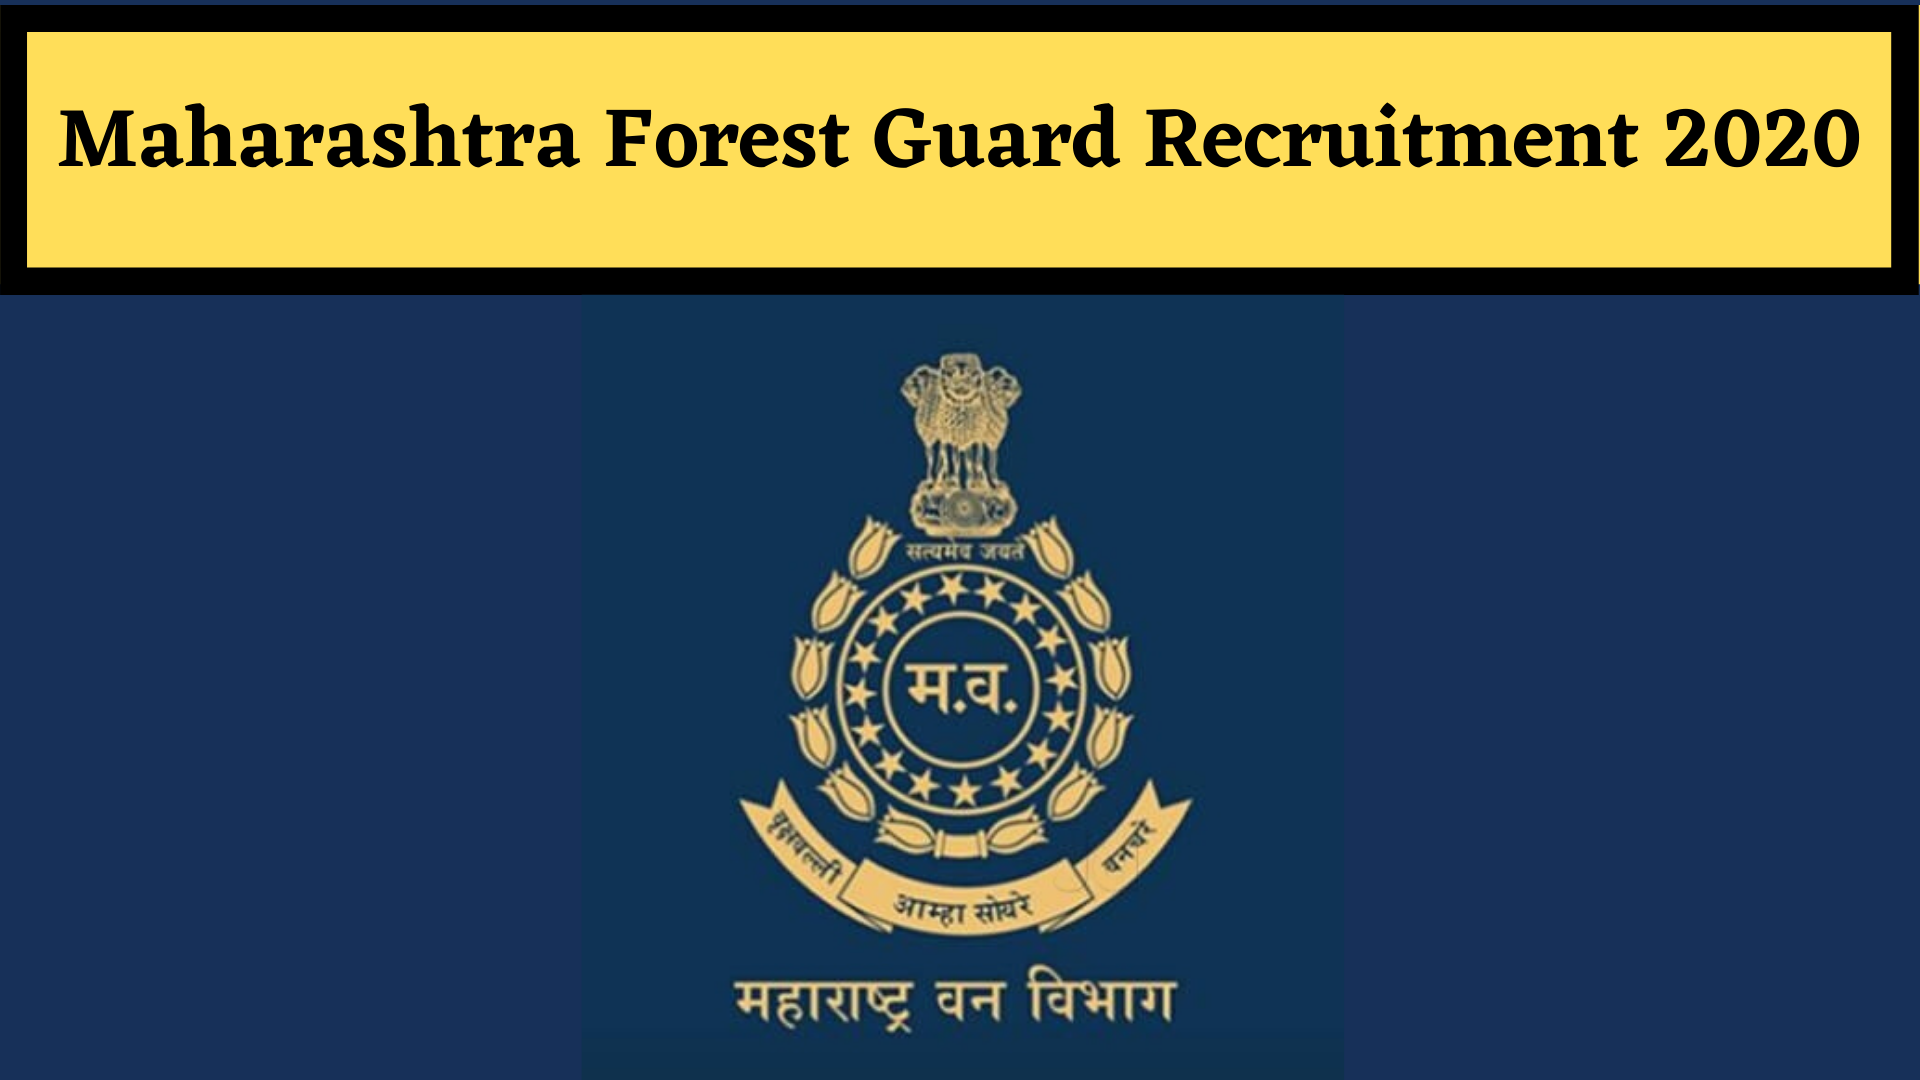 forest recruitment 2019 maharashtra forest department recruitment 2019 maharashtra forest guard bharti 2020 maharashtra maharashtra forest department recruitment 2018 www.mahaforest.nic.in recruitment 2019 maharashtra forest department recruitment 2018-19 maharashtra forest department recruitment 2020 forest bharti 2019 maharashtra Page navigation